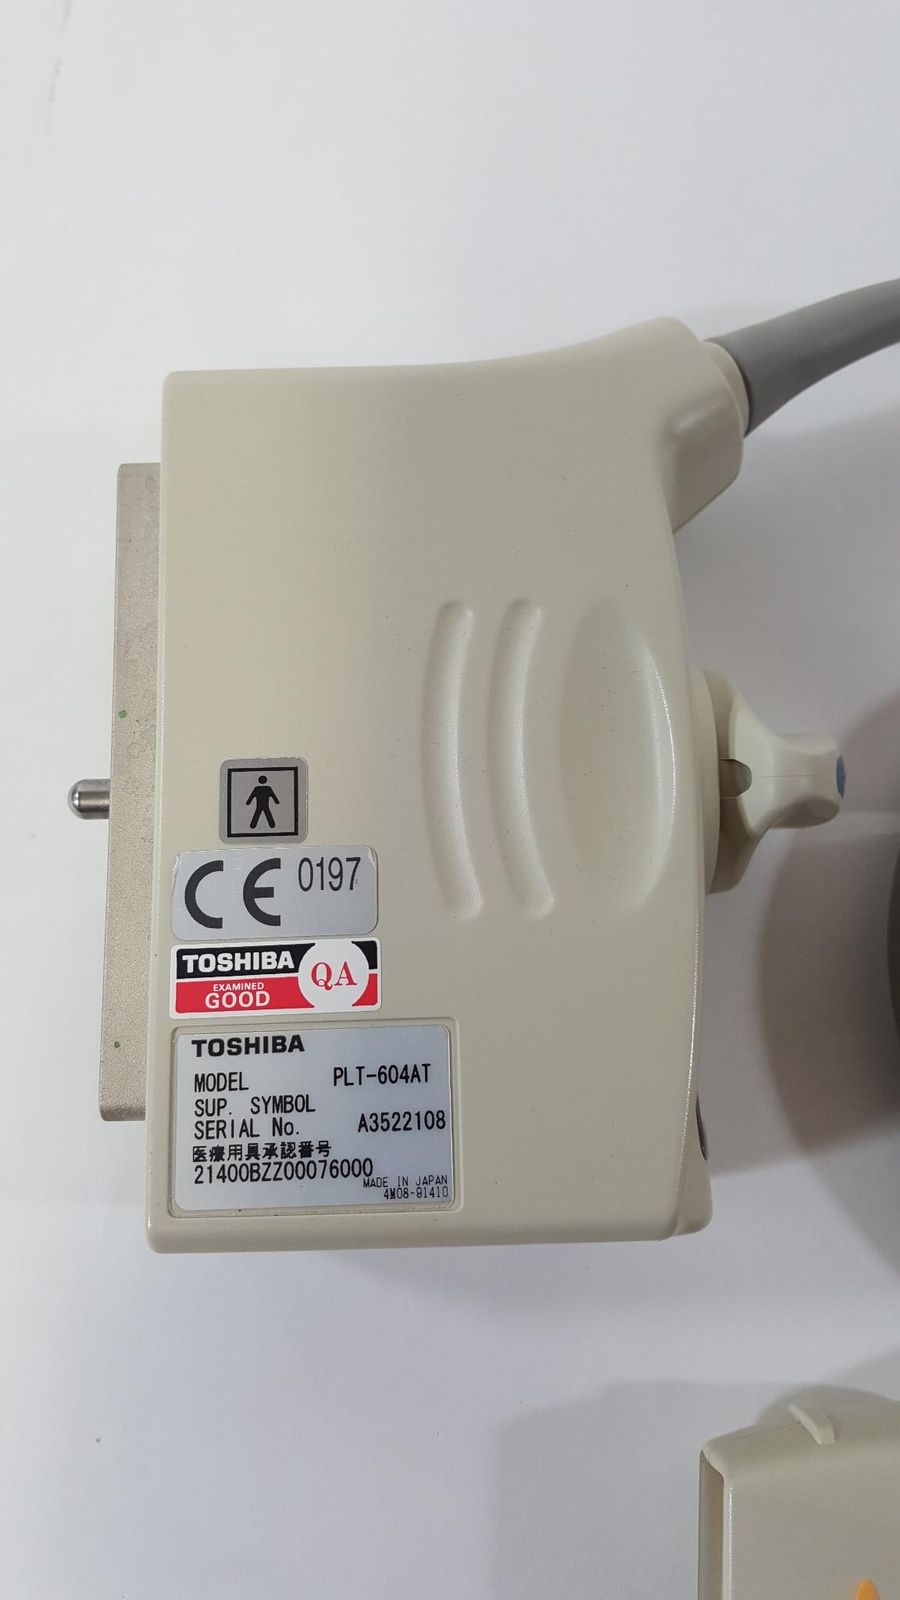 Toshiba PLT-604AT 6MHz Linear Ultrasound Transducer Probe DIAGNOSTIC ULTRASOUND MACHINES FOR SALE